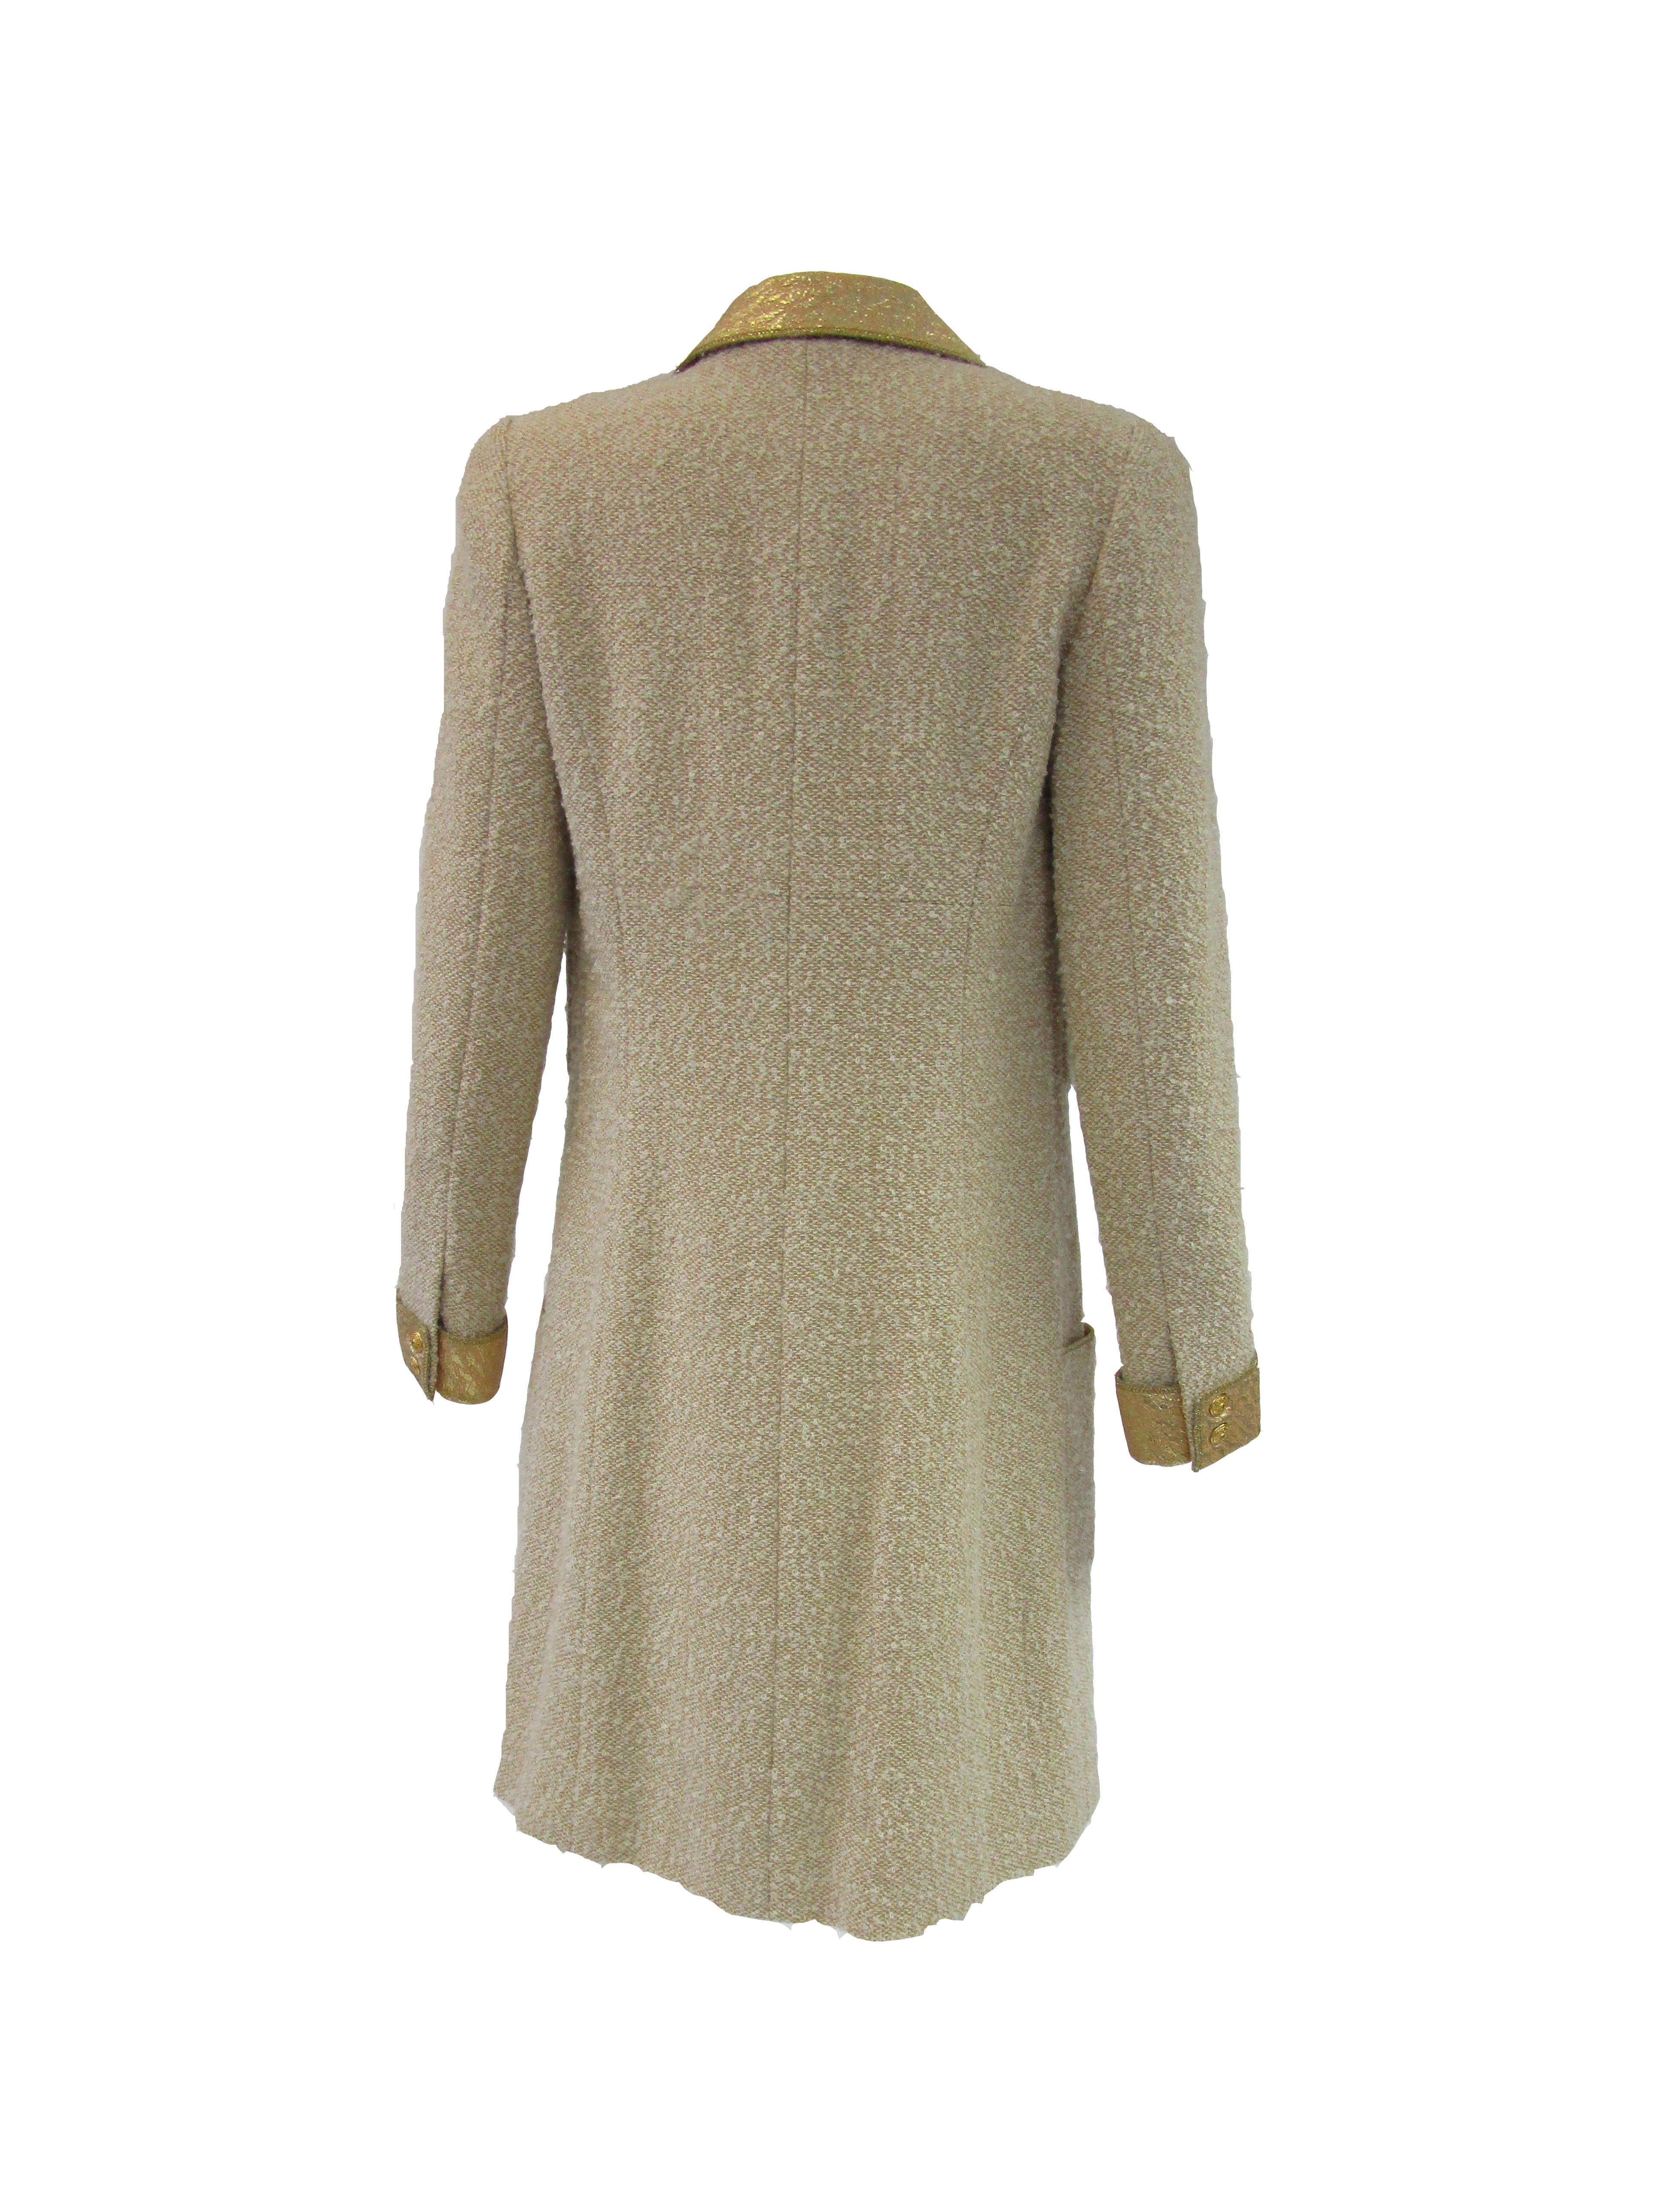 1996 Chanel by Lagerfeld Golden Boucle and Lame Shift Dress and Coat For Sale 5